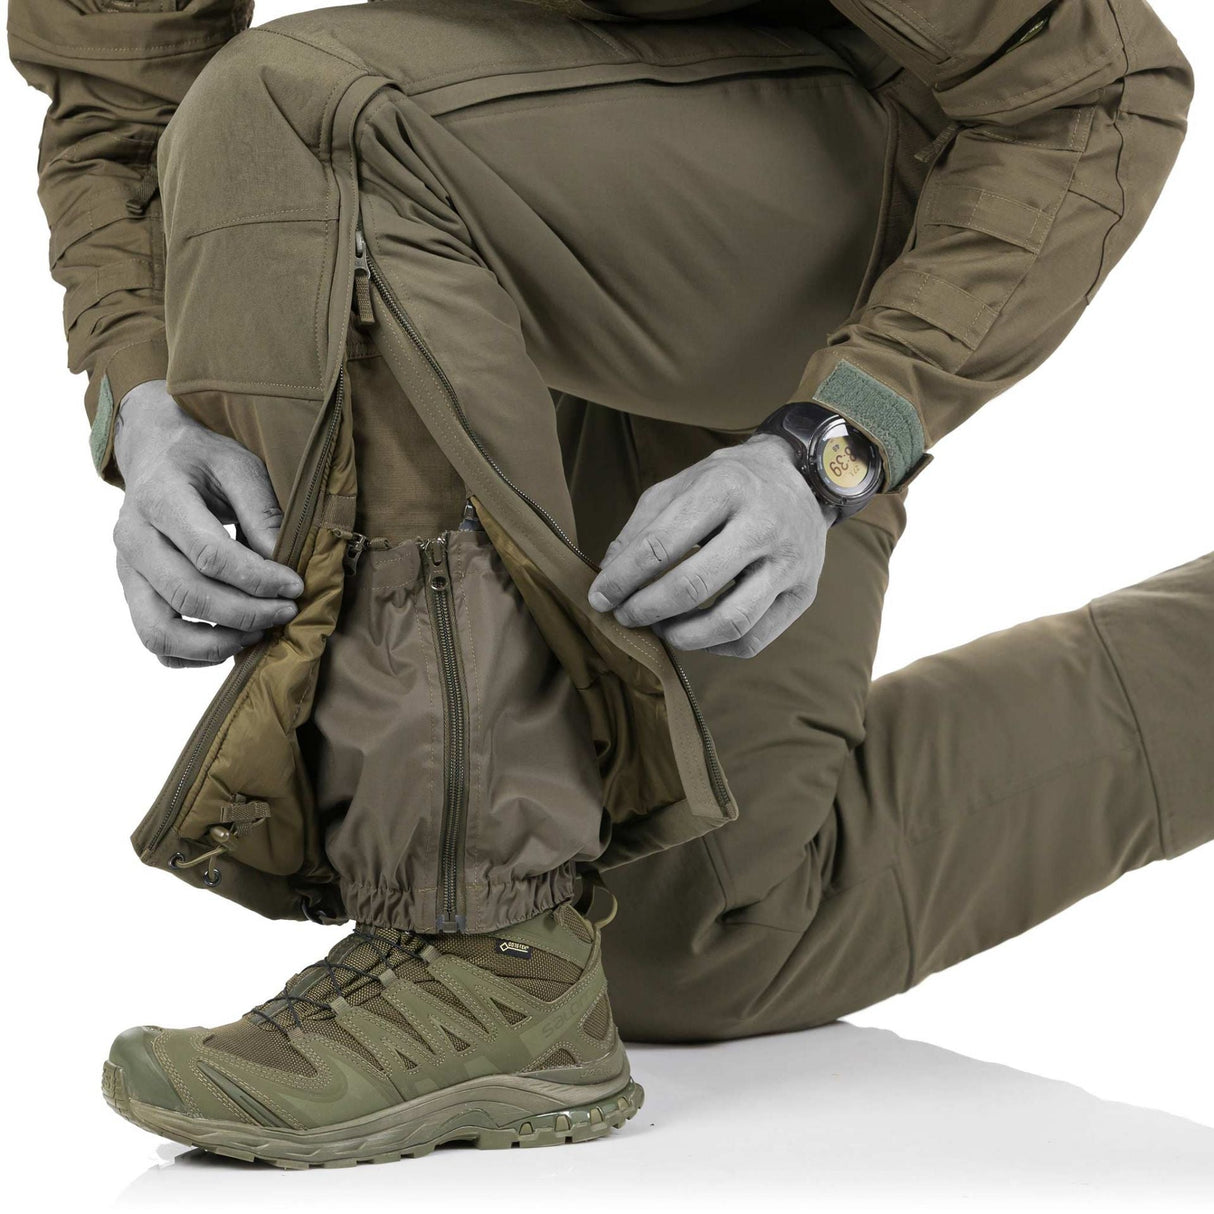 Delta OL 4.0 Tactical Winter Pants: Detachable gaiters and boot hook for added functionality. Conquer the cold with confidence.